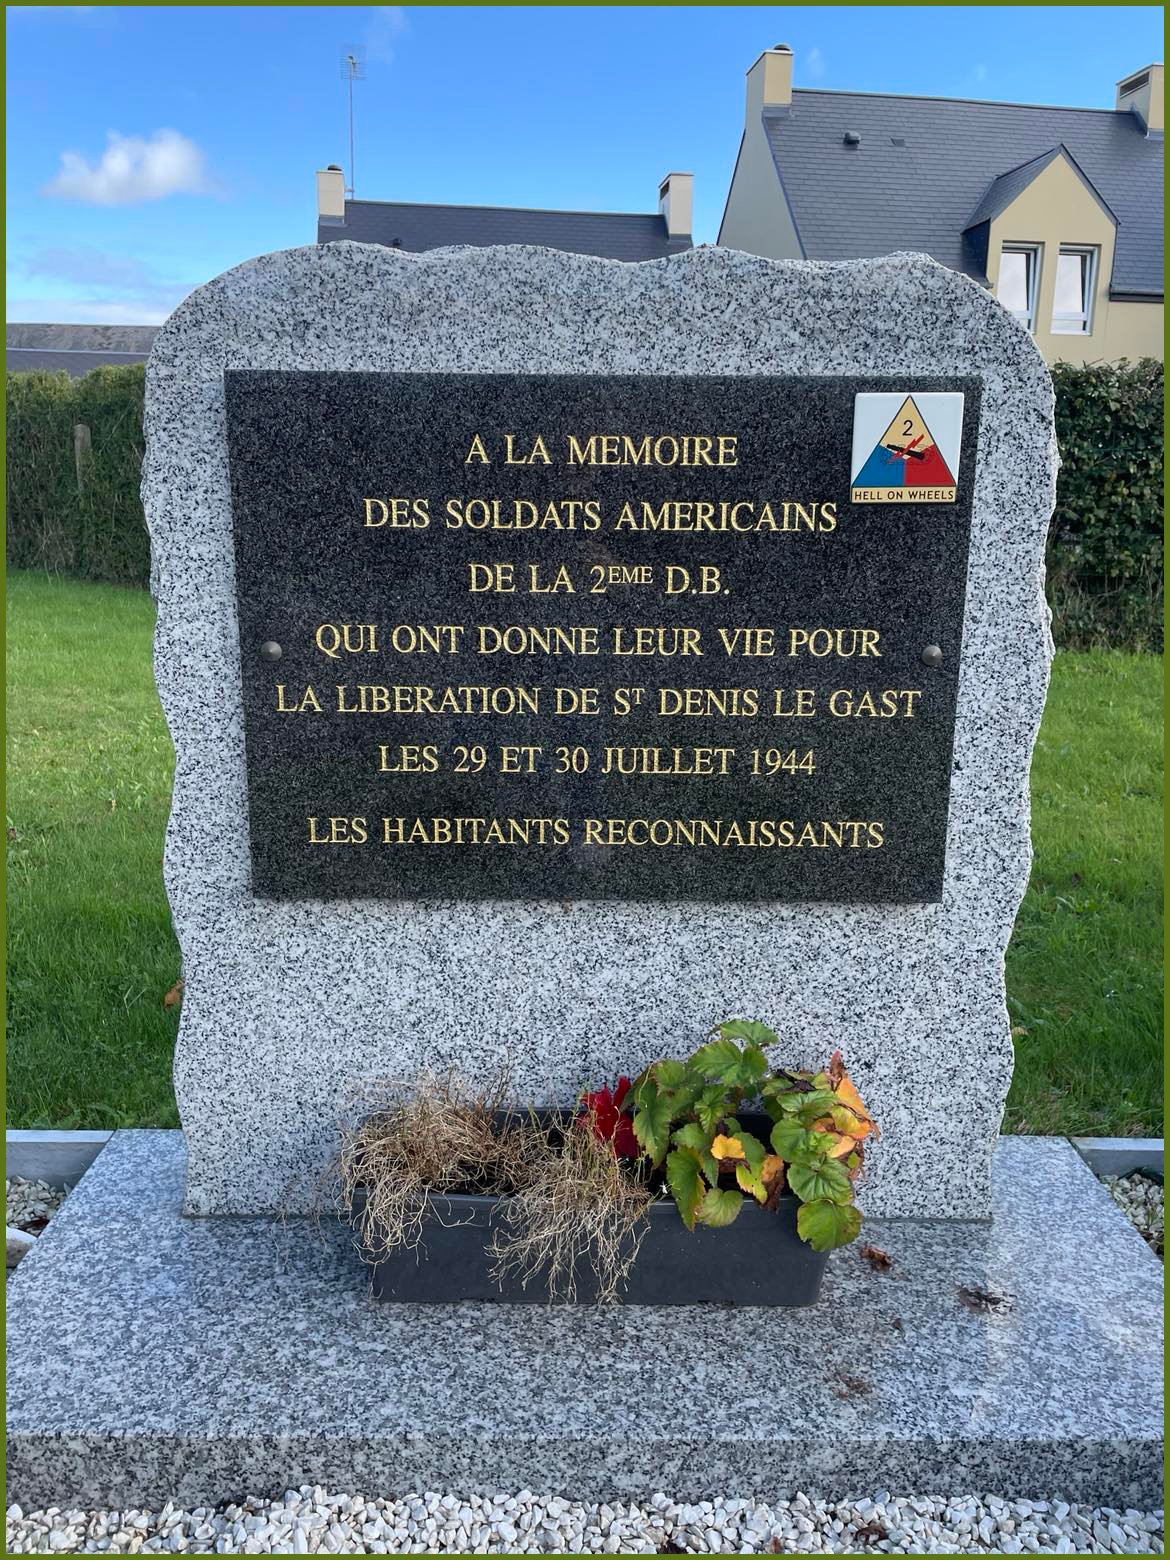 2nd Armored Division monument in Saint-Denis-le-Gast